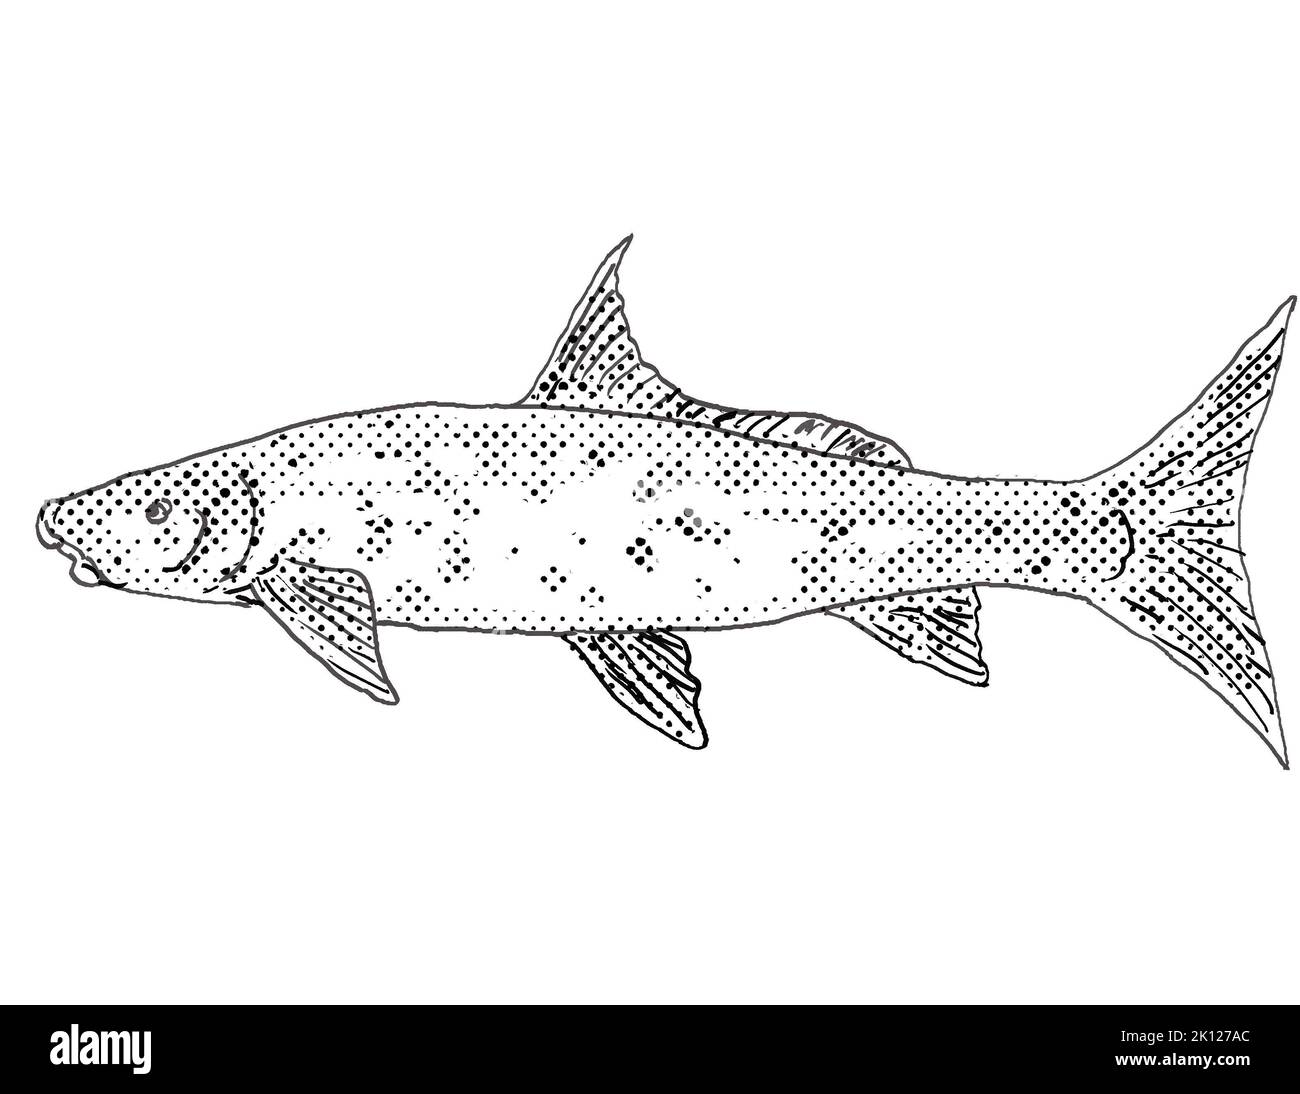 Cartoon style drawing of a blue sucker or Cycleptus elongatus freshwater fish found in North America with halftone dots on isolated background in blac Stock Photo